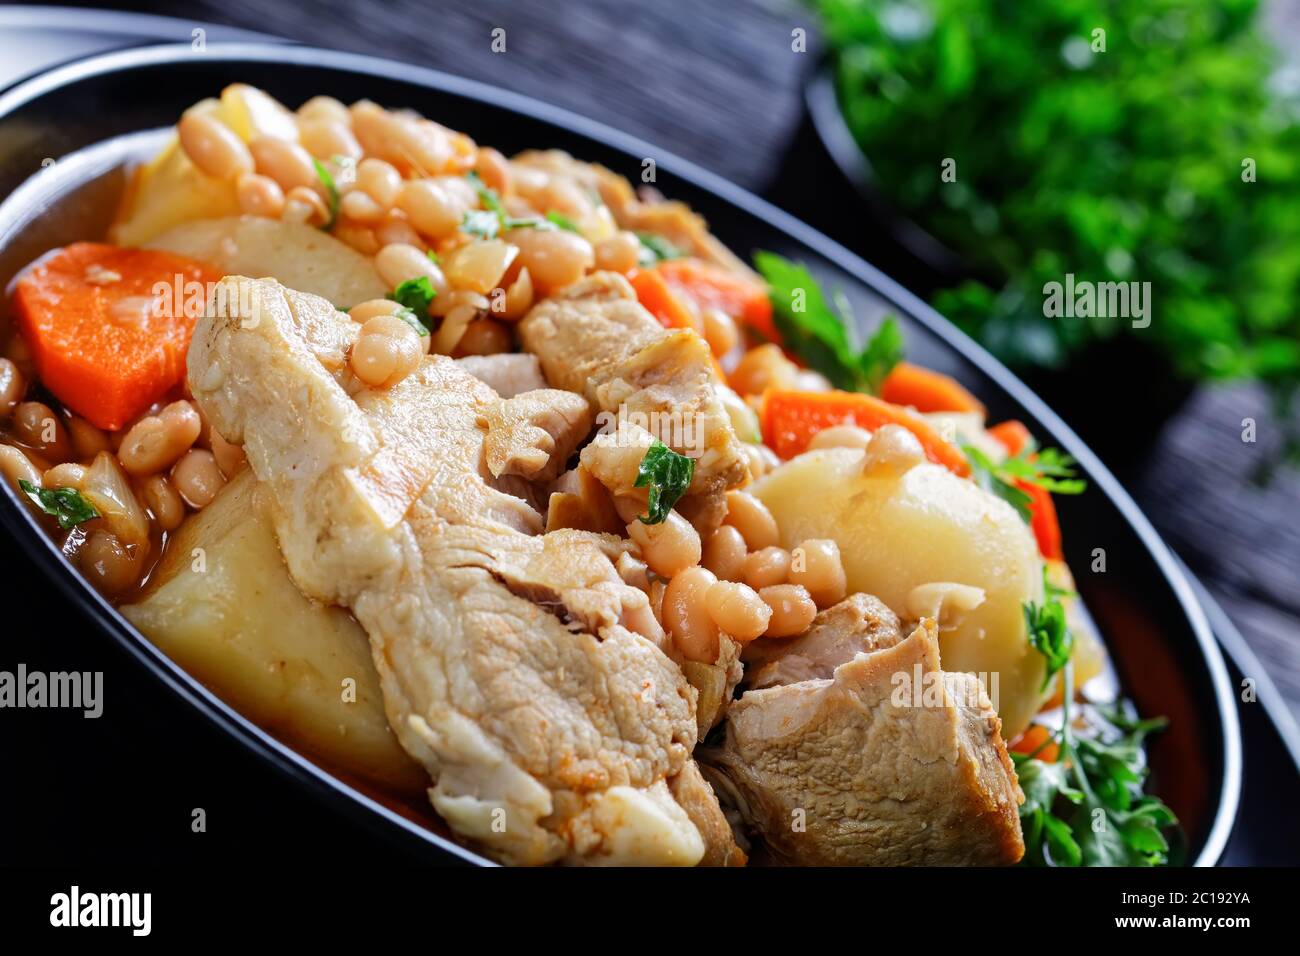 close-up of a portion of white bean, vegetables and pork steak stew in a black bowl on a dark wooden table, landscape view Stock Photo